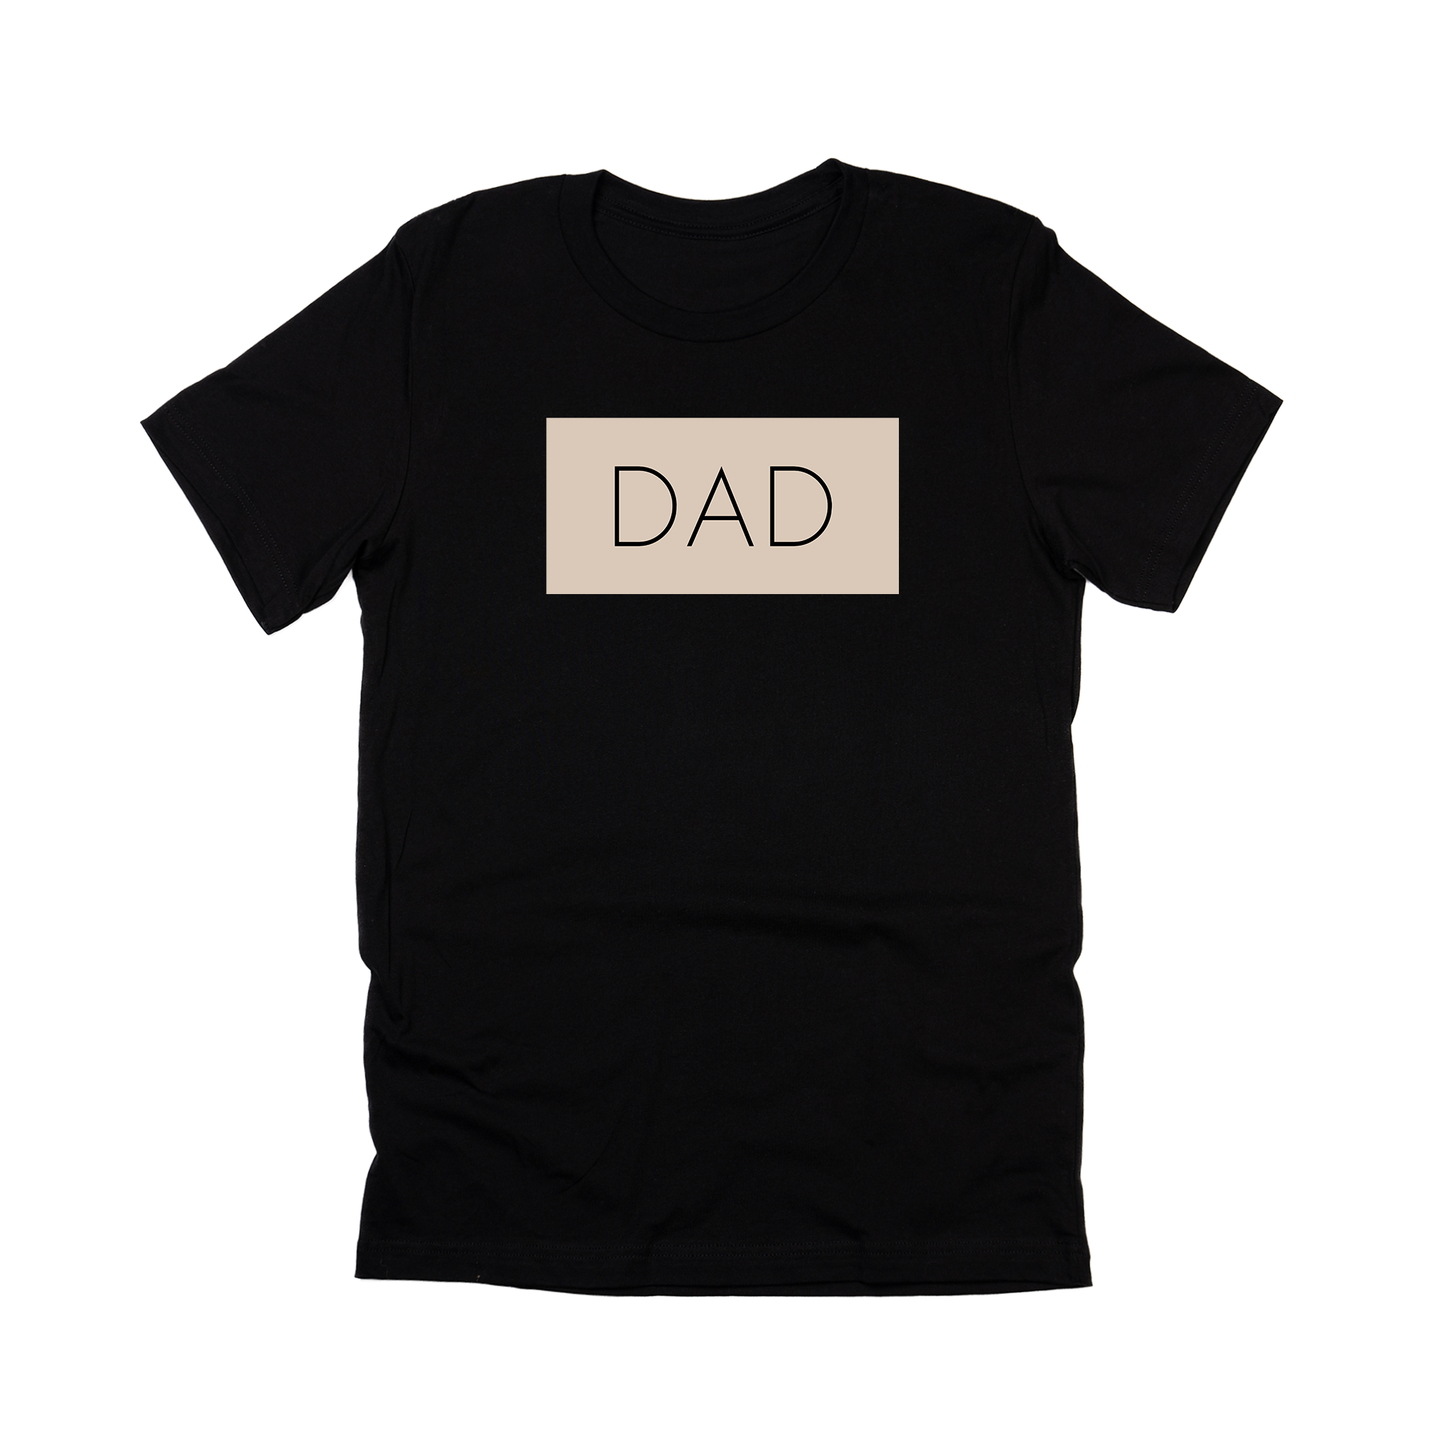 Dad (Boxed Collection, Stone Box/Black Text, Across Front) - Tee (Black)